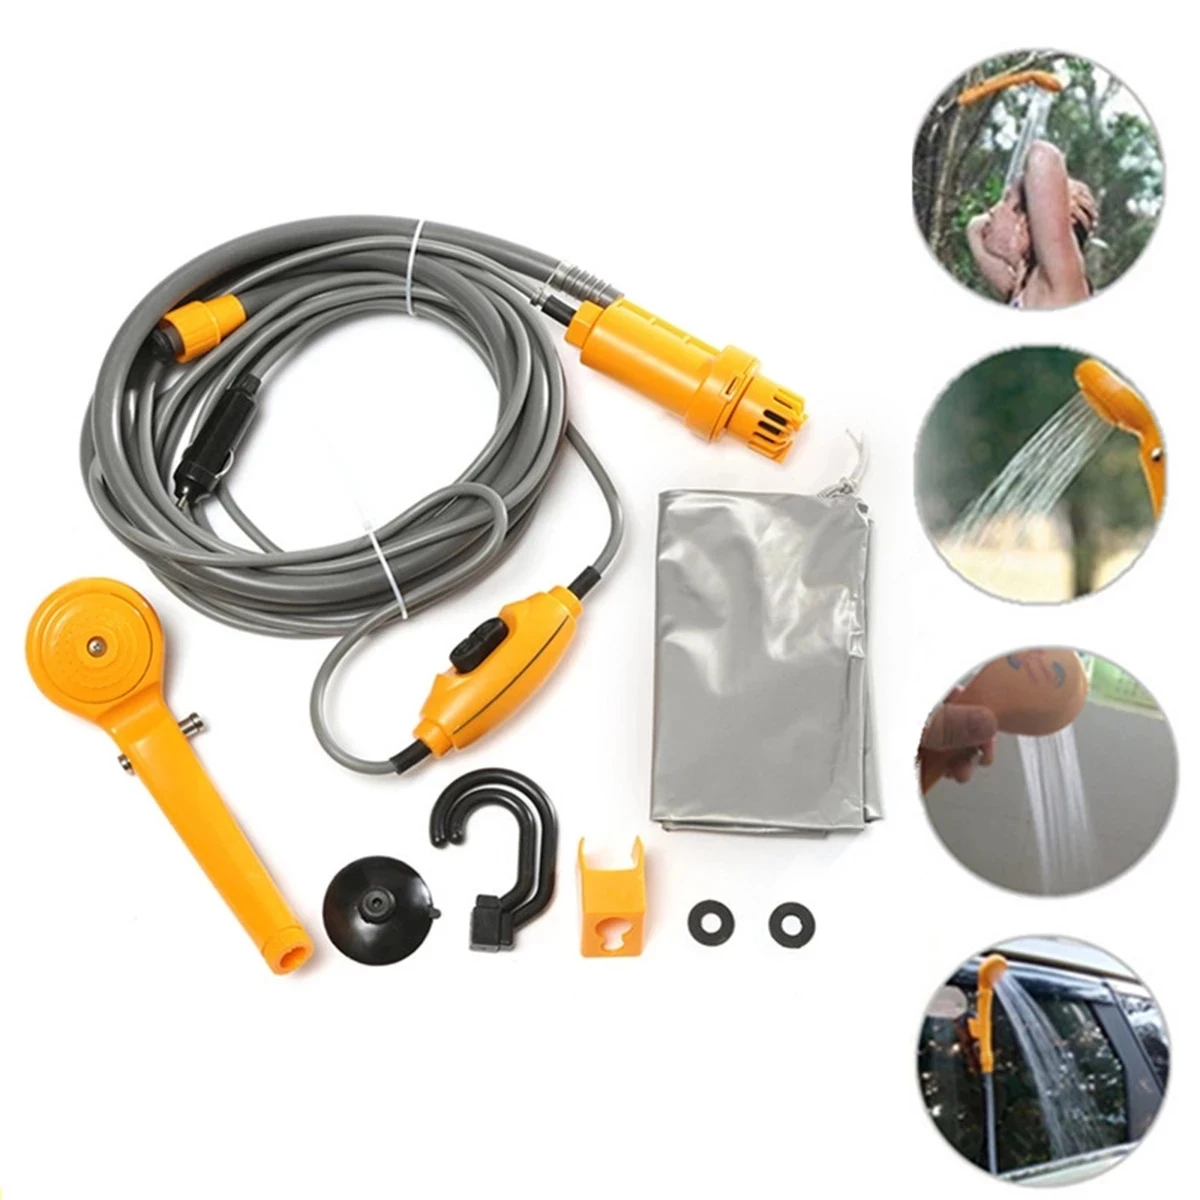 Portable Camping Shower 12v Electric Outdoor Water Bags Car Washer 12v Camping Bath Shower Bag Pump For Camping Outdoor Hiking